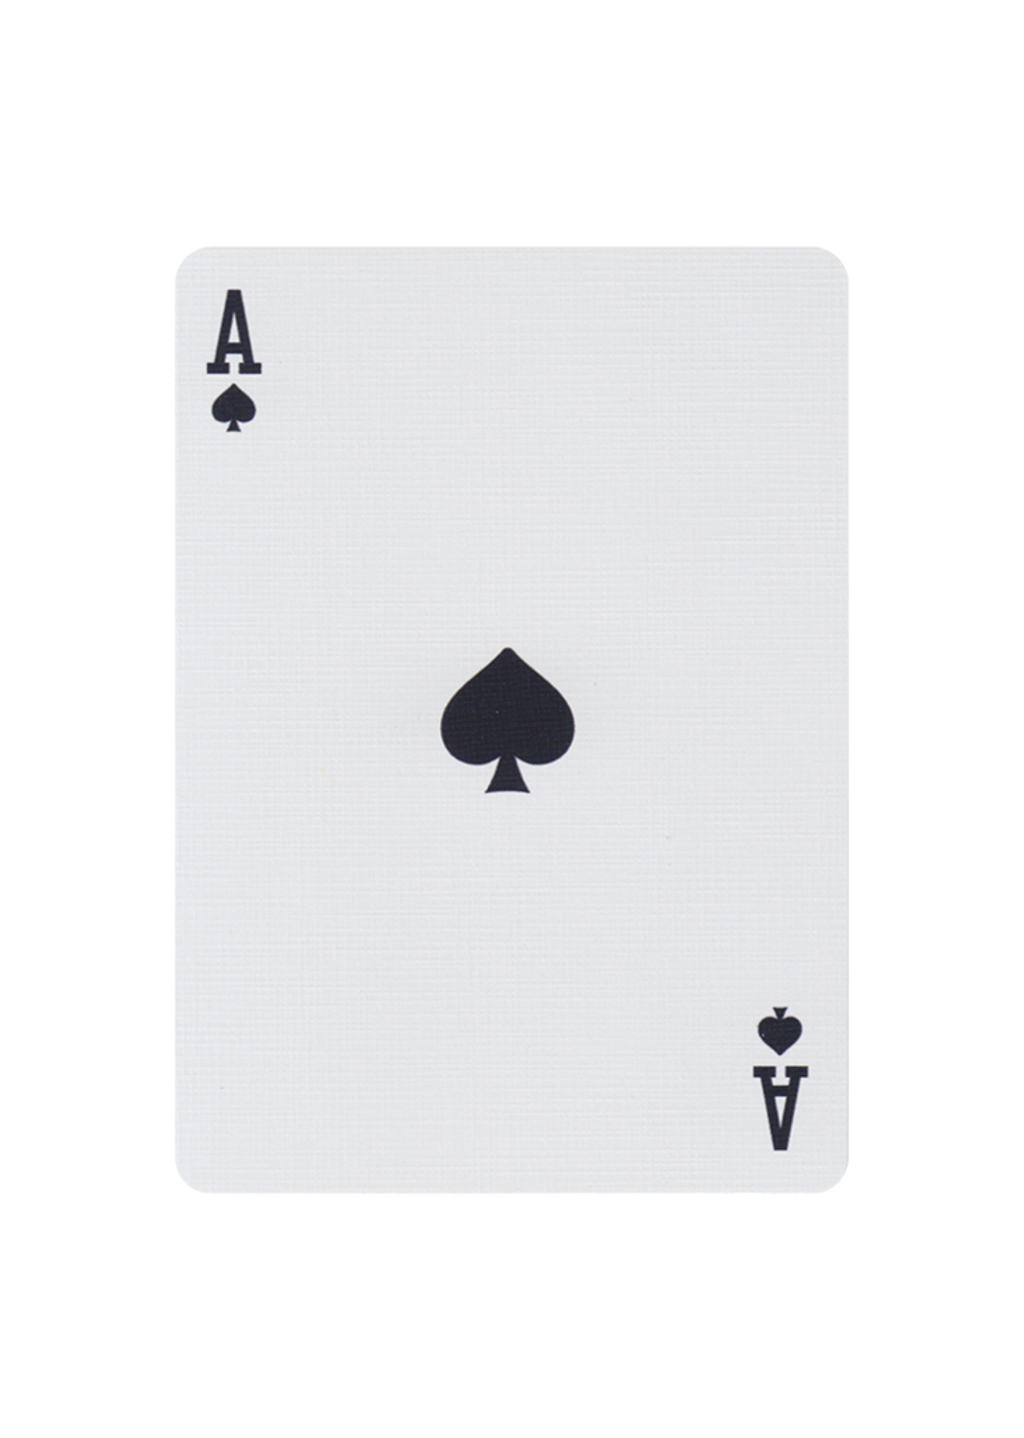 playing-cards-cubeline-3_1024x1024.png